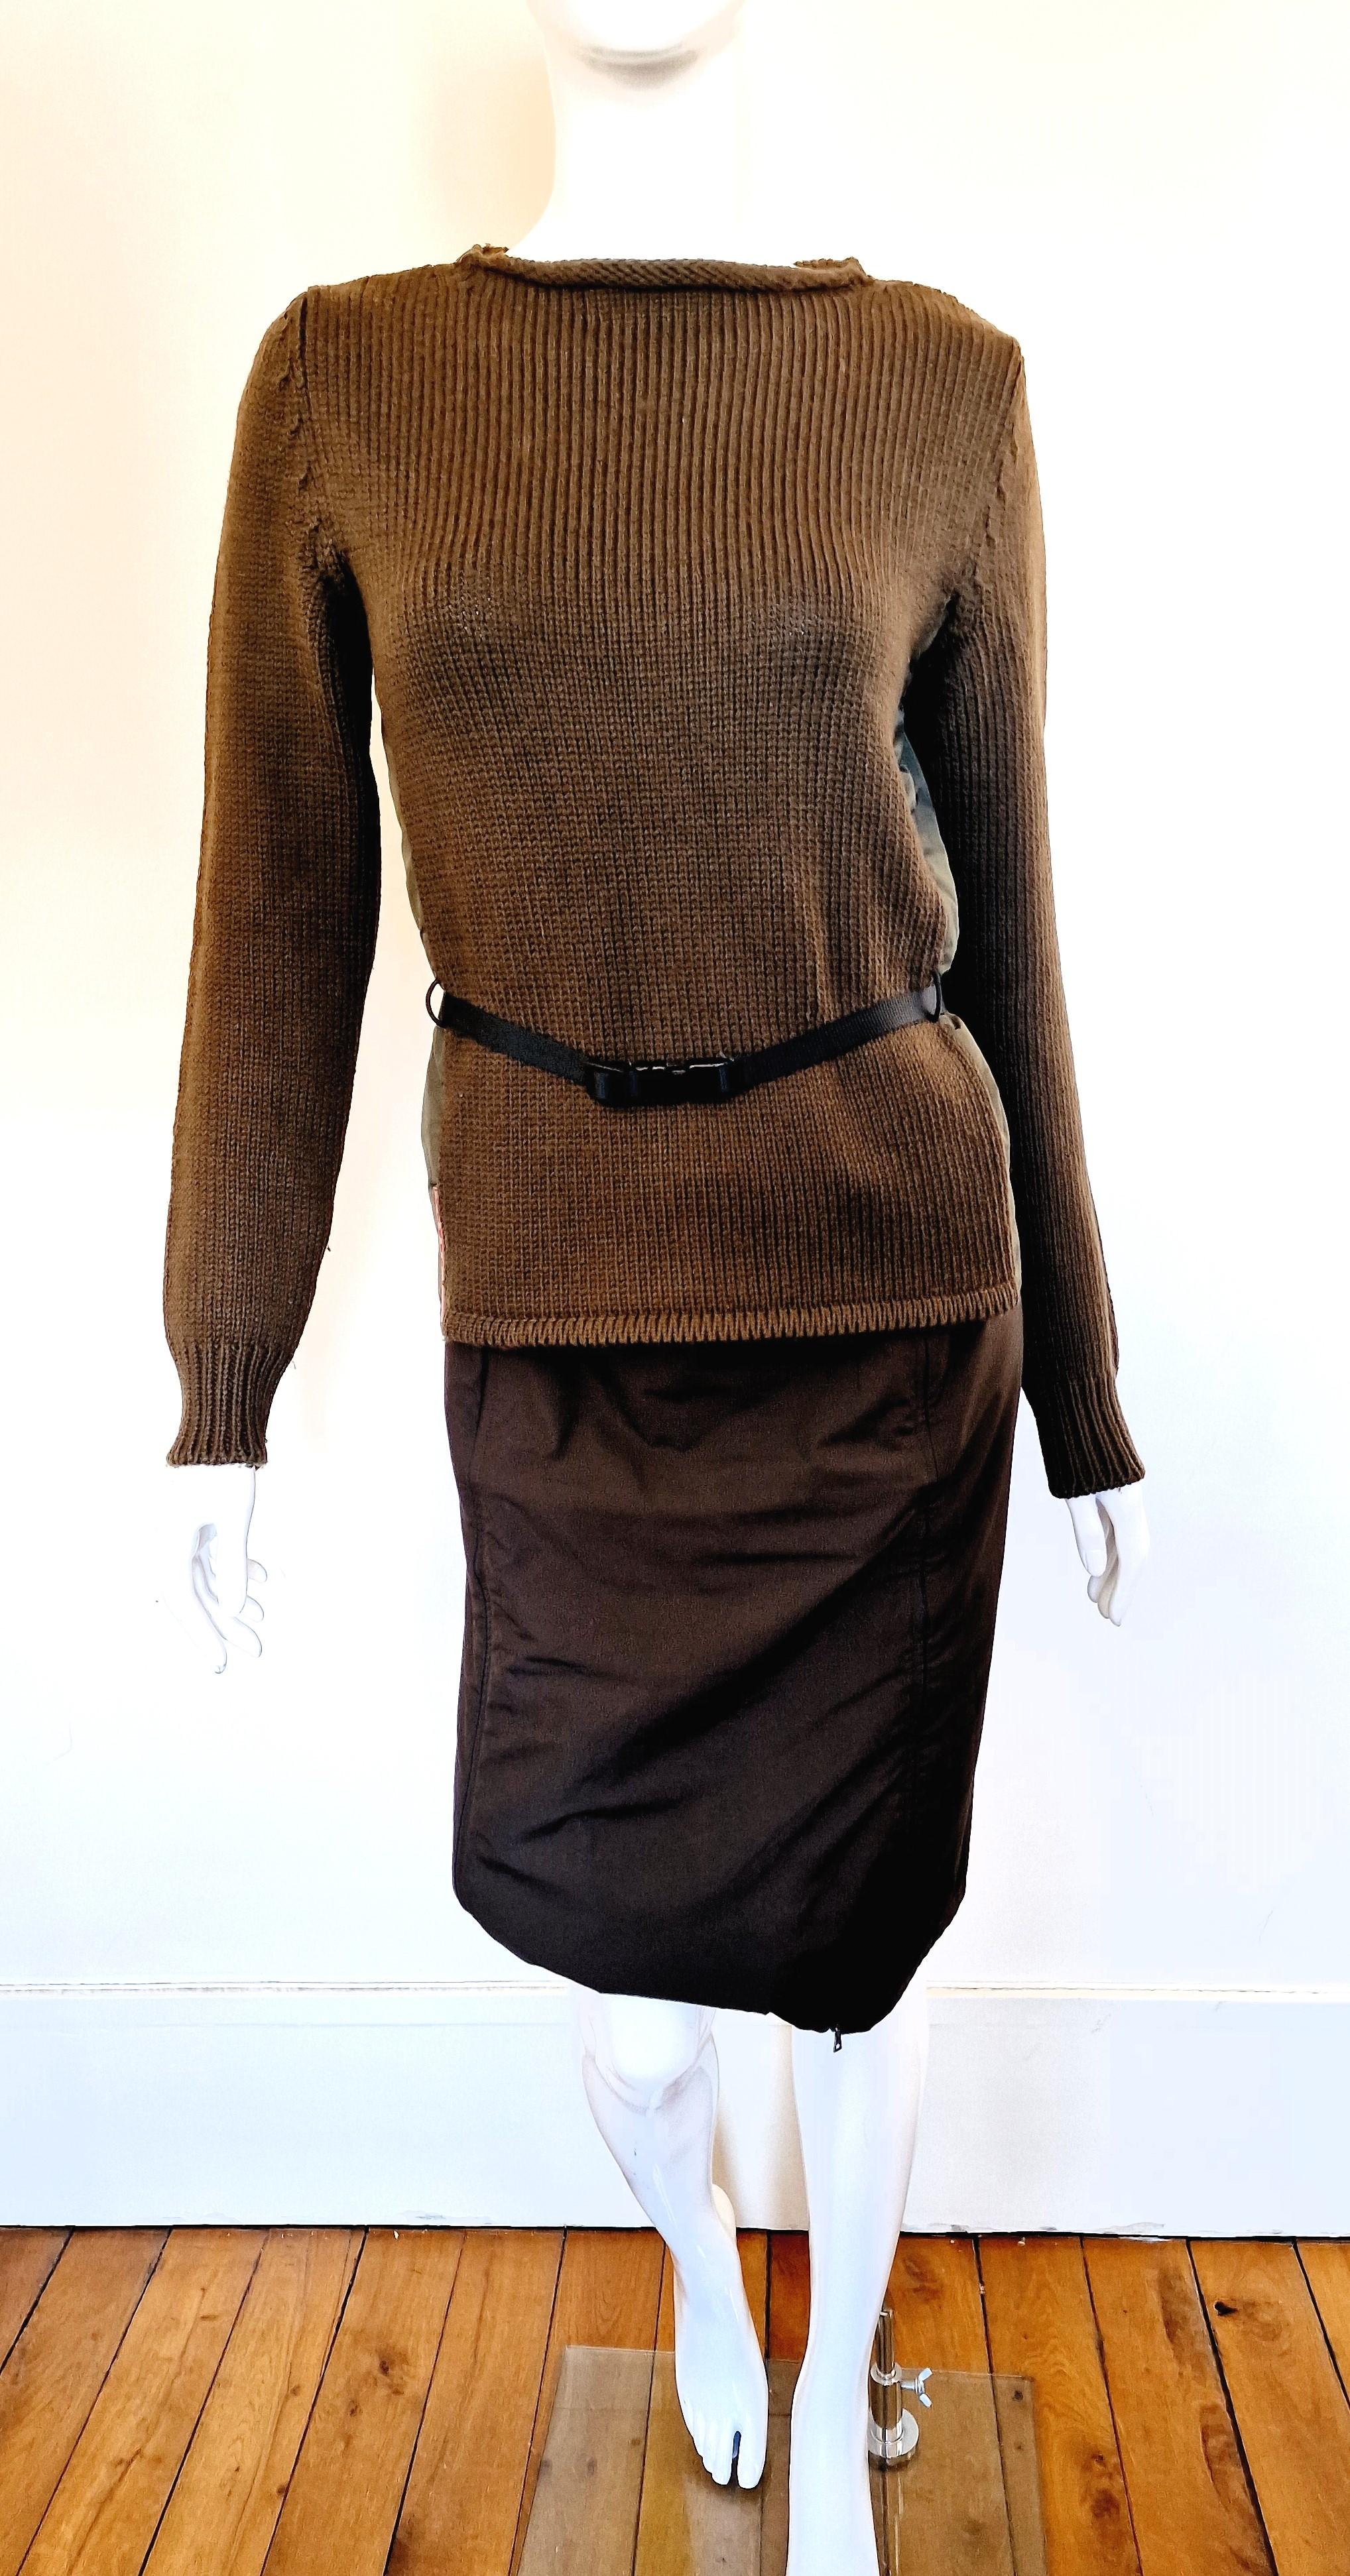 Tactical set by Prada!
Skirt + sweater!
Prada signatures on the sweater and the skirt as well. Red label.
The sweater has a belt with metal buckles. 
The skirt has 2 zippers, you can open the front :) 

EXCELLENT condition!
SIZE
Large.
Marked size: